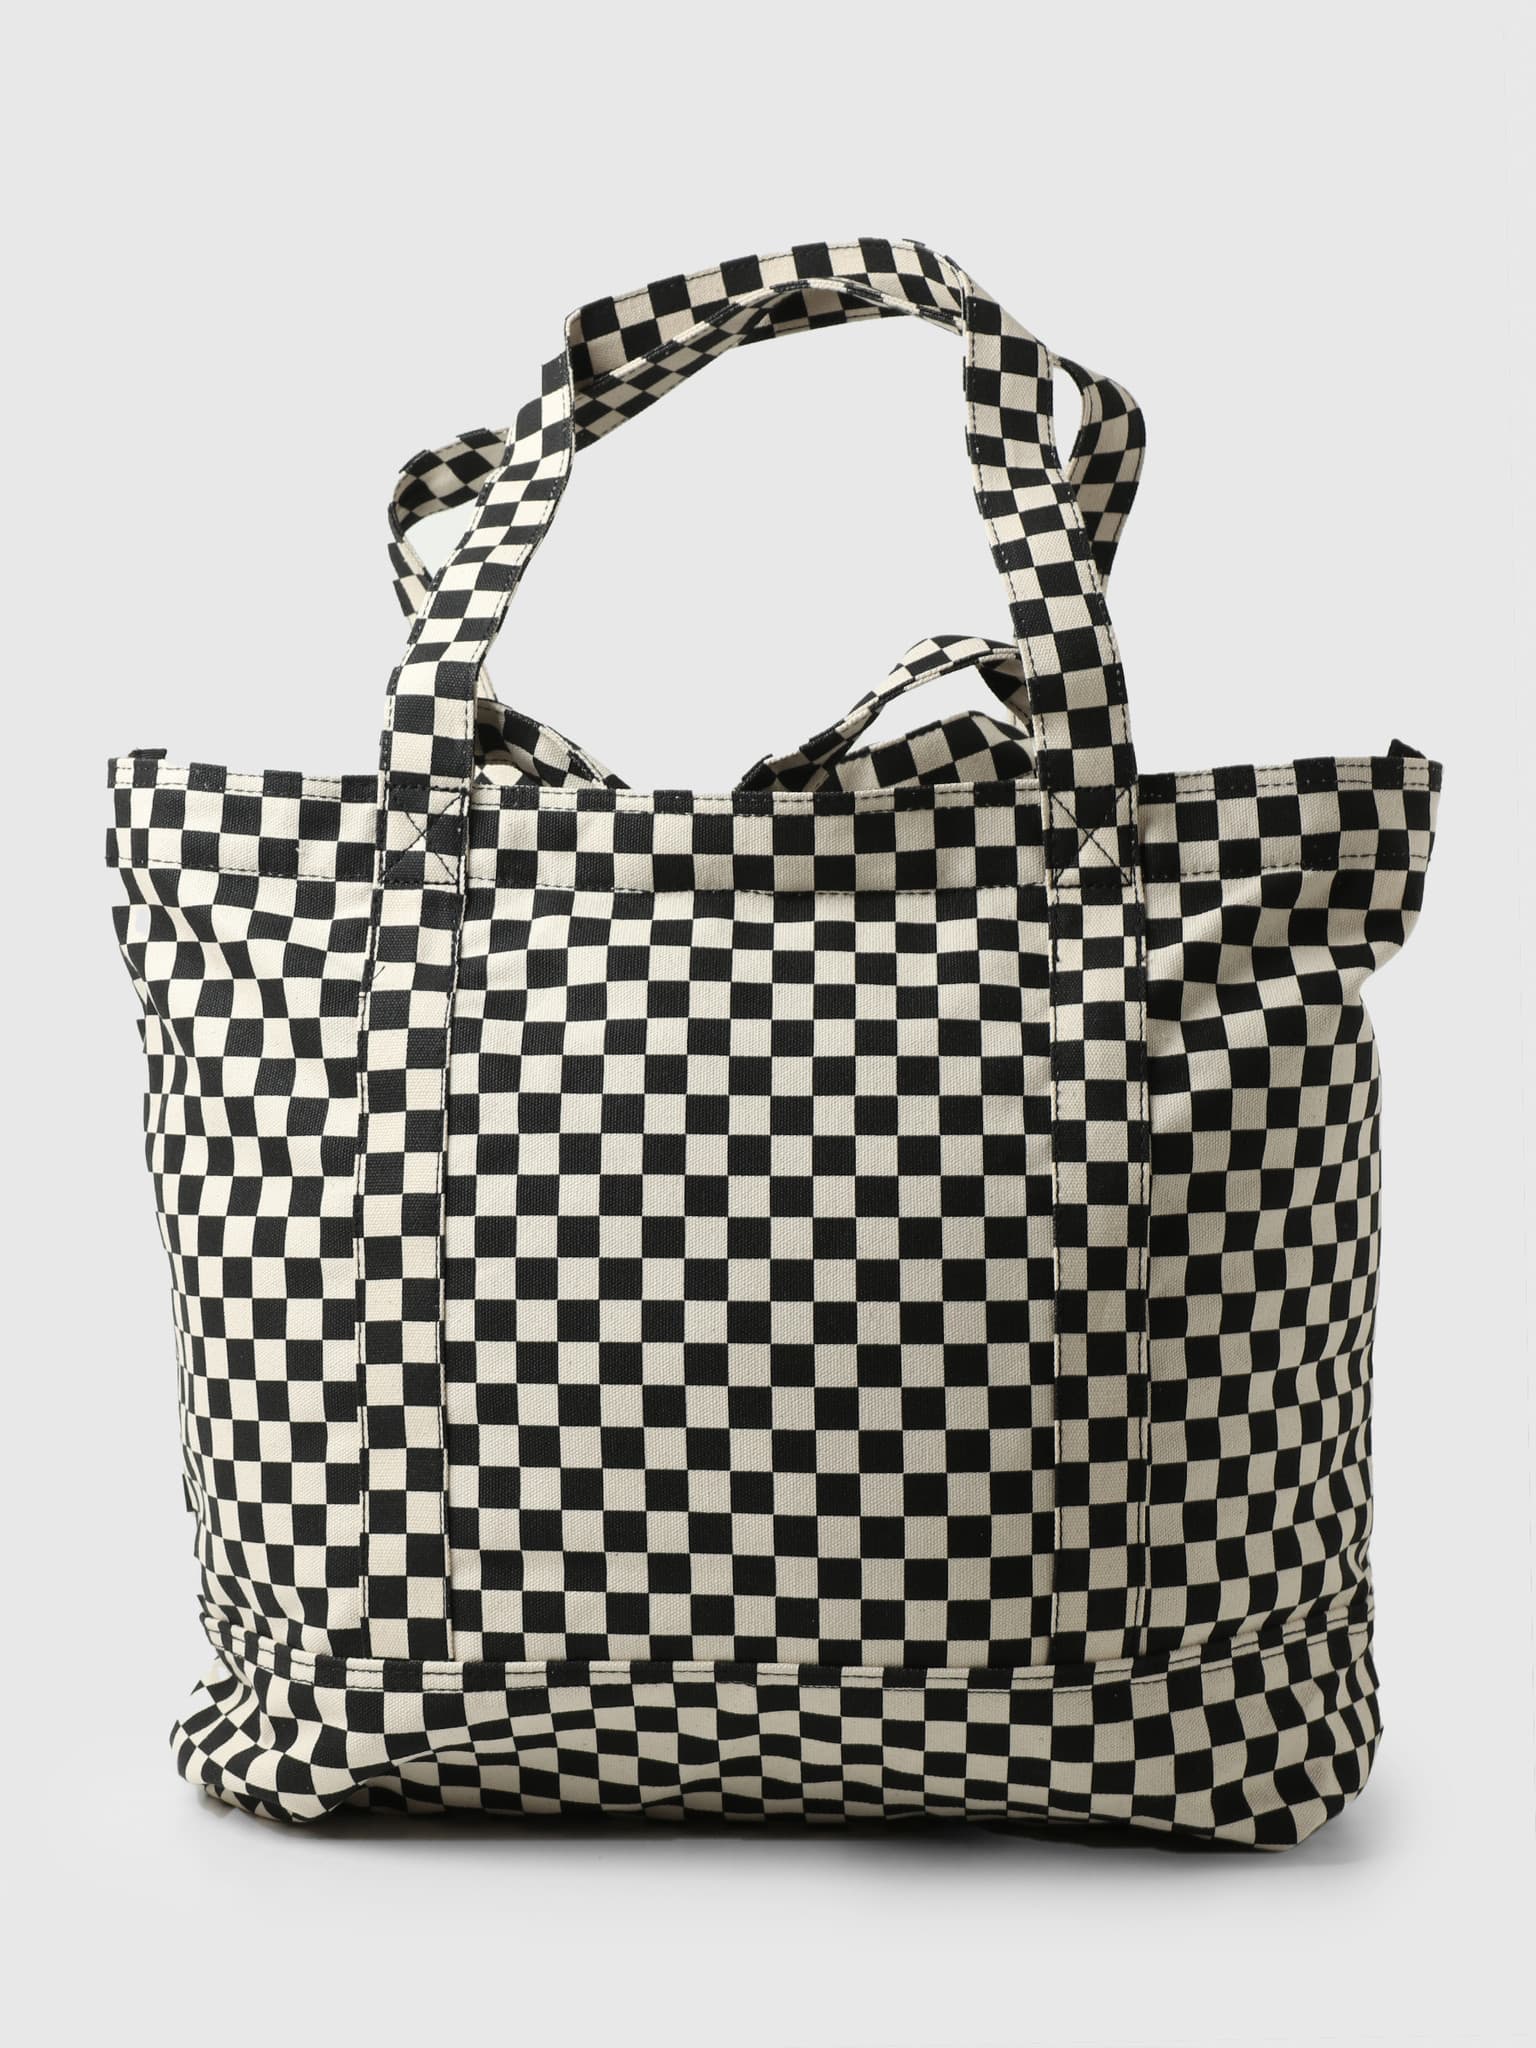 Wm Tell All Zip Tote Checkerboard VN0A5I1K7051